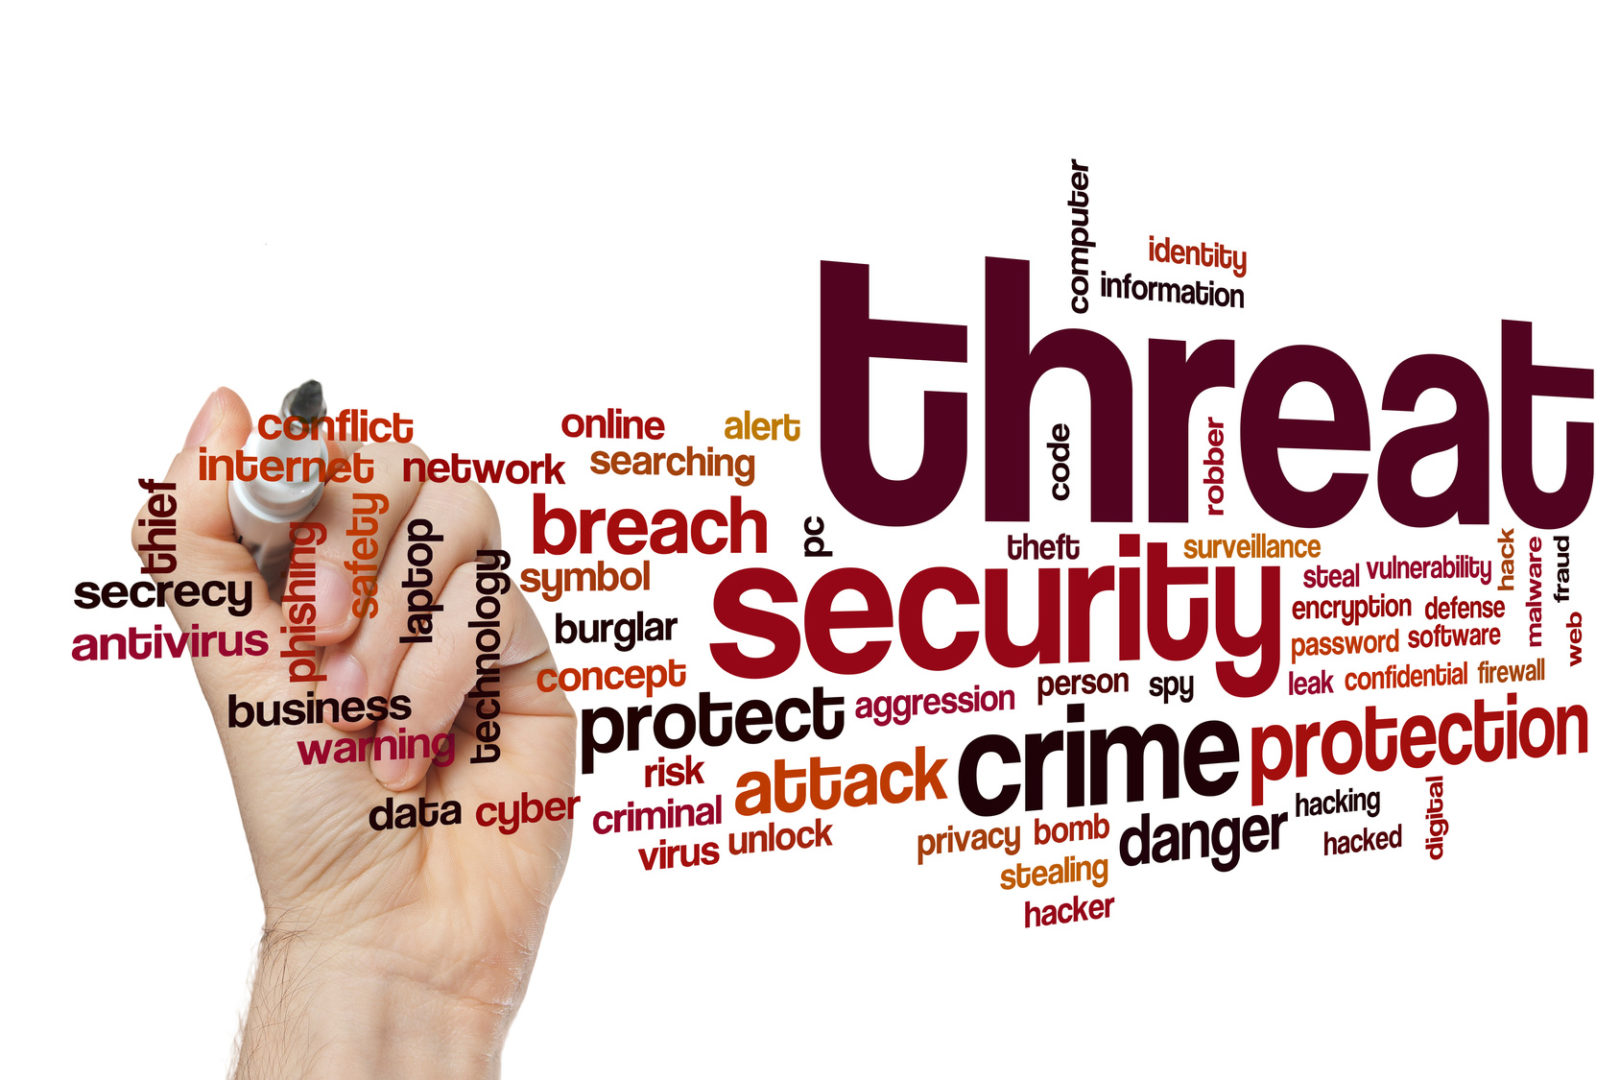 Network Security Threats: 5 Ways to Protect Yourself